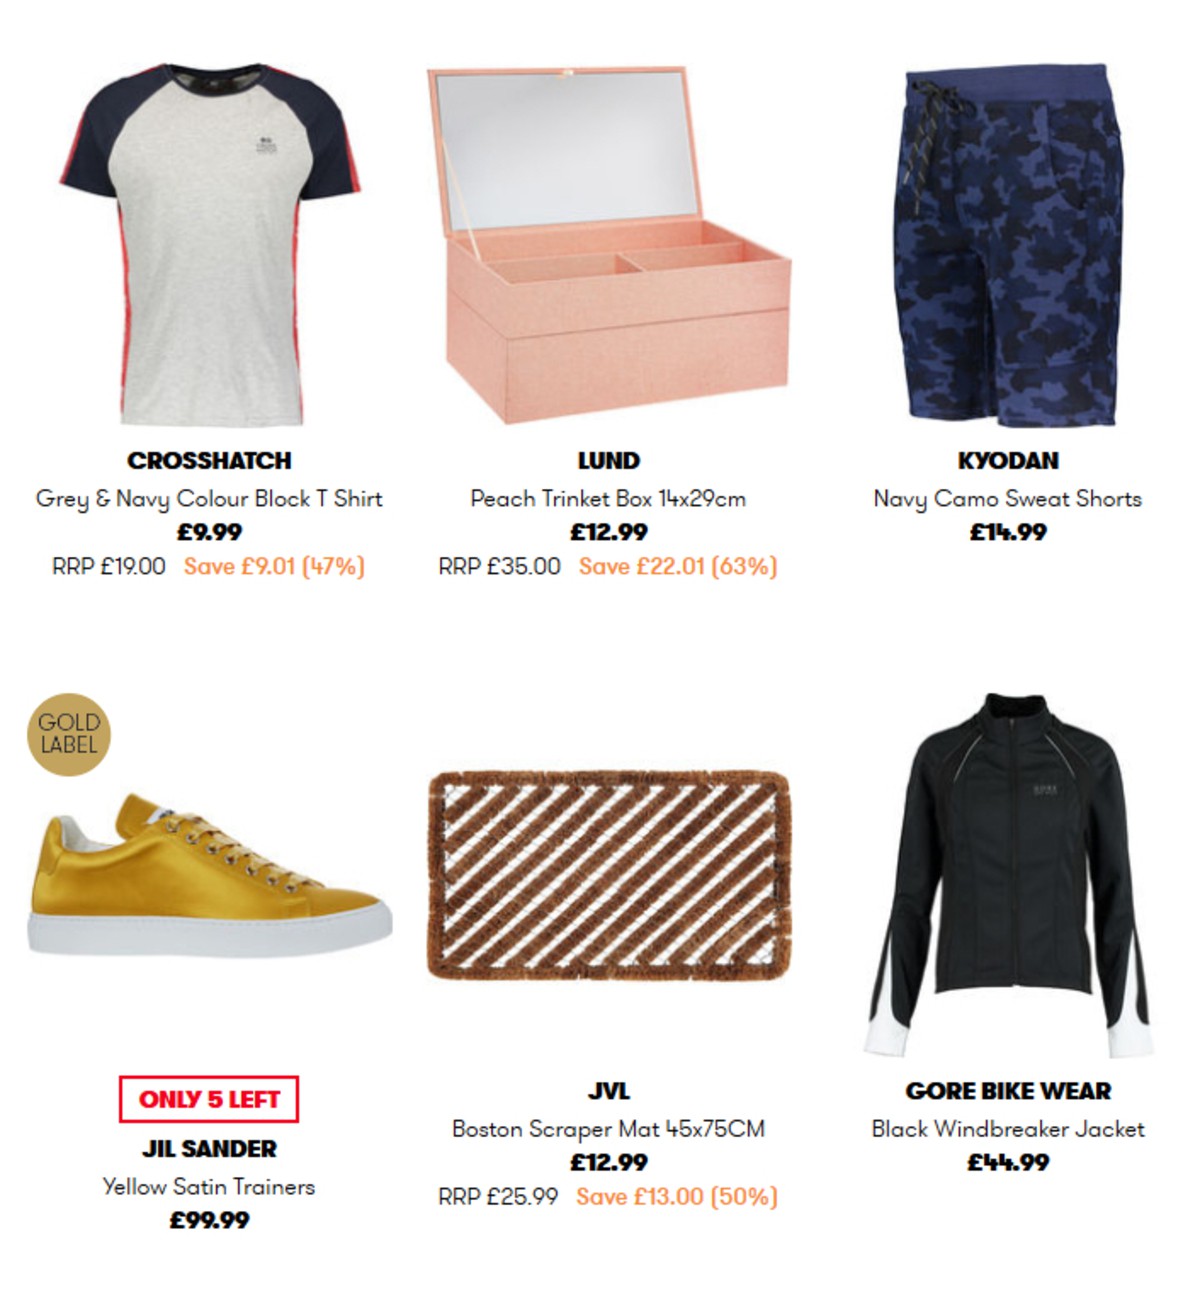 TK Maxx Offers from 4 May